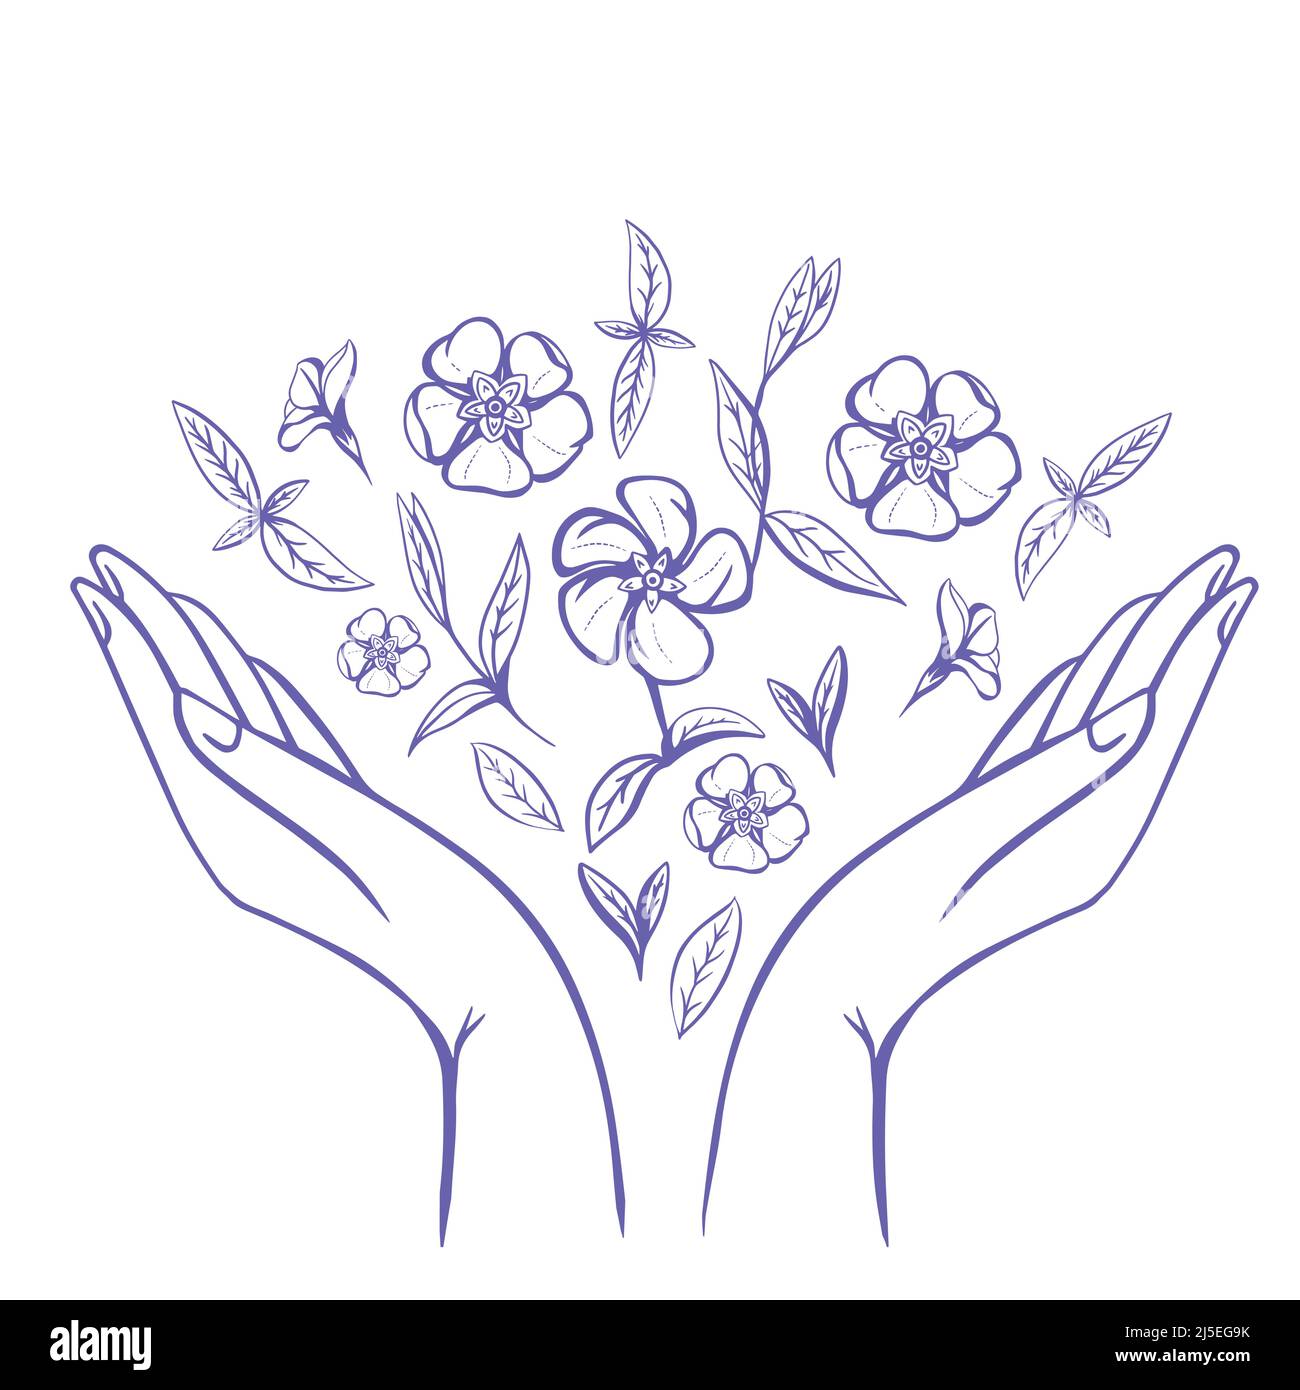 Periwinkle flower in a middle of Raised Women's Arms. Good for Feminine and Eco Friendly Products illustration Stock Vector